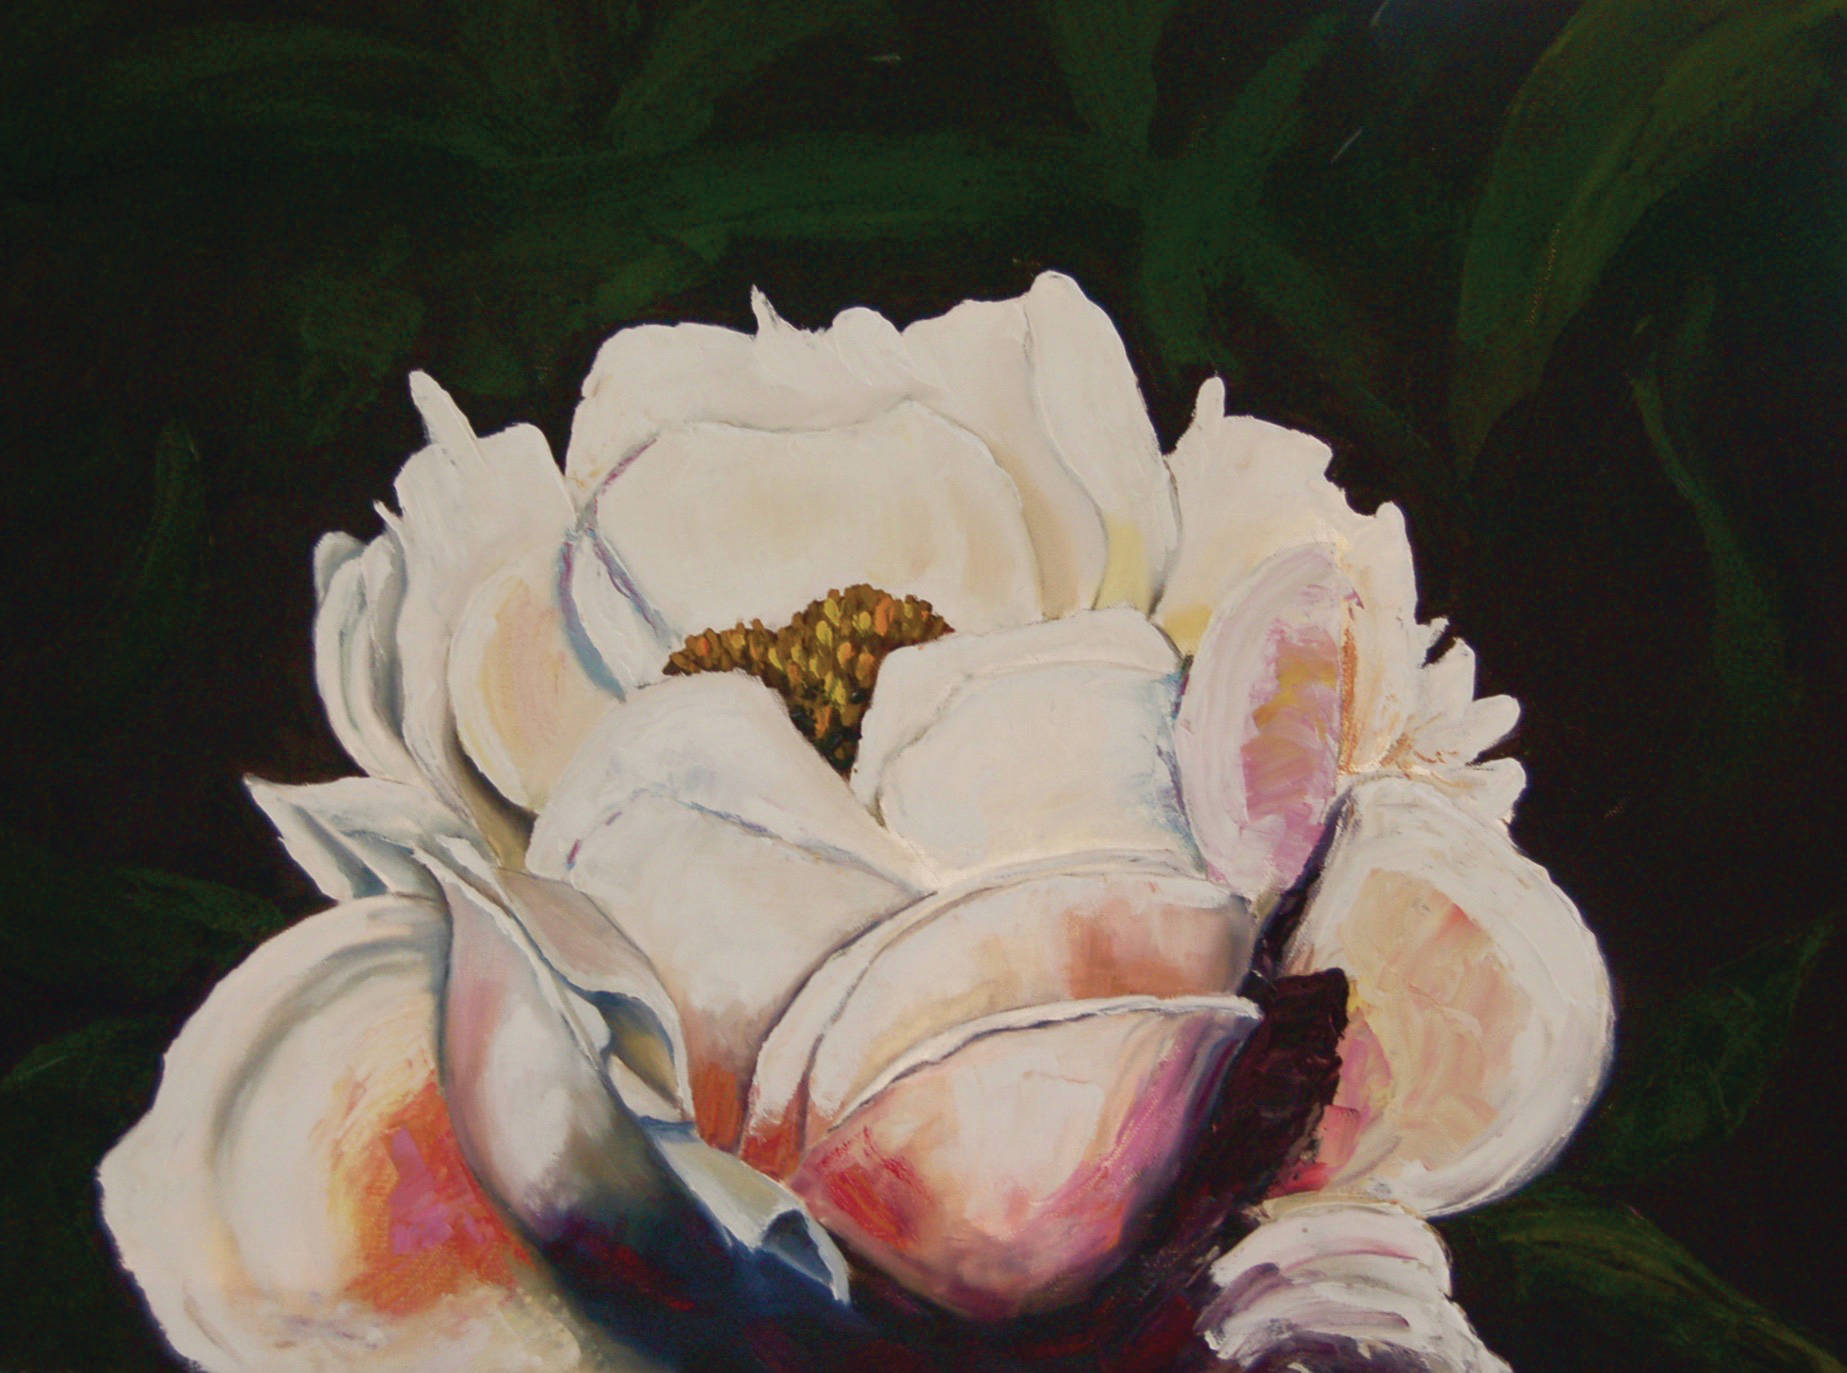 Brtini Siekaniec’s peony painting is part of an exhibit opening Friday, July 2, 2021, at Grace Ridge Brewing in Homer, Alaska. It also will be on the label for Grace Ridge’s Imperial White beer made especially for the 2021 Homer Peony Festival.(Photo provided)